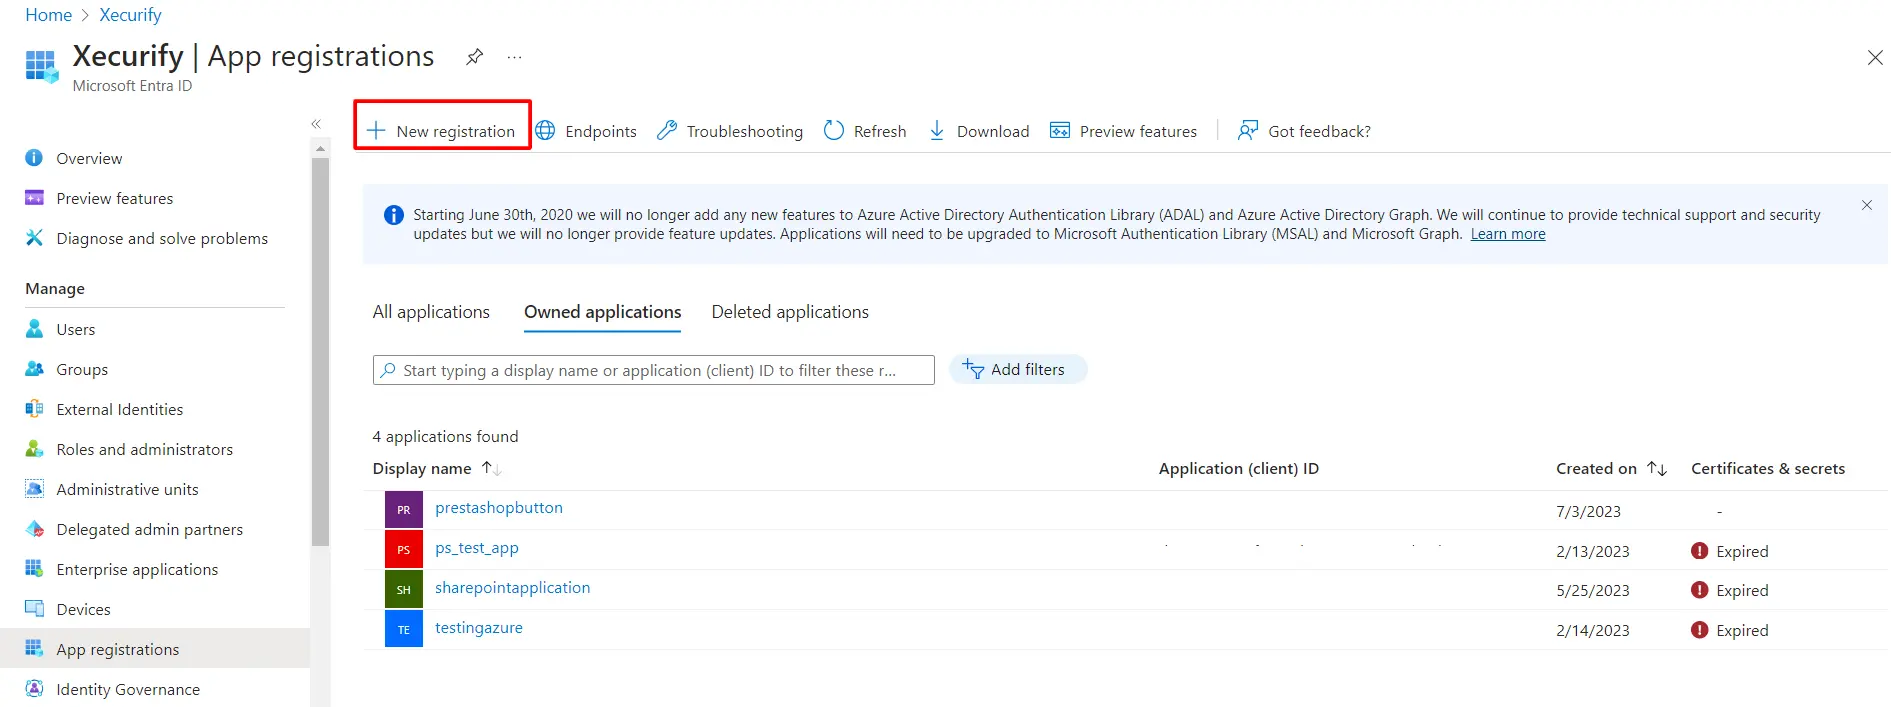 Azure AD Magento SSO - Azure Single Sign-On(SSO) Login in Magento - New registrations